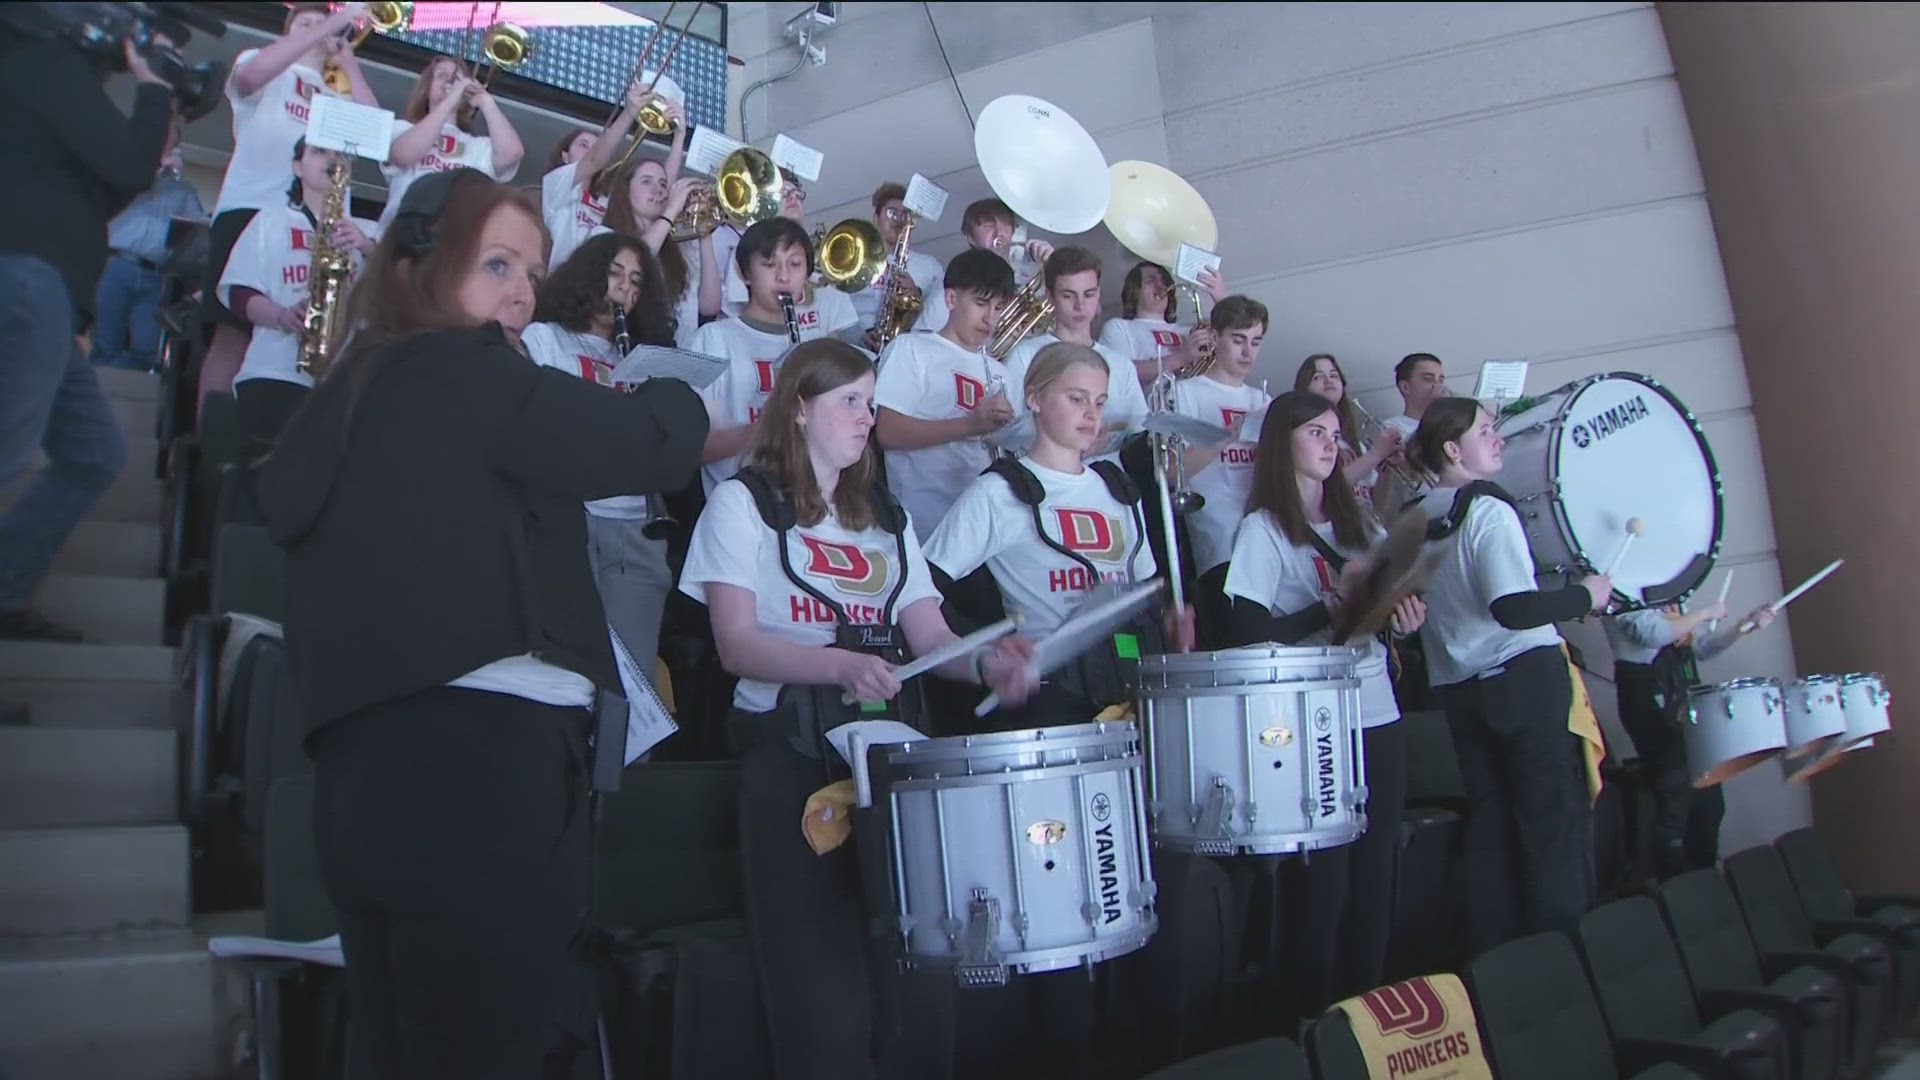 The Hornets became Pioneers as the band filled in for Denver at Thursday’s Frozen Four in St. Paul.